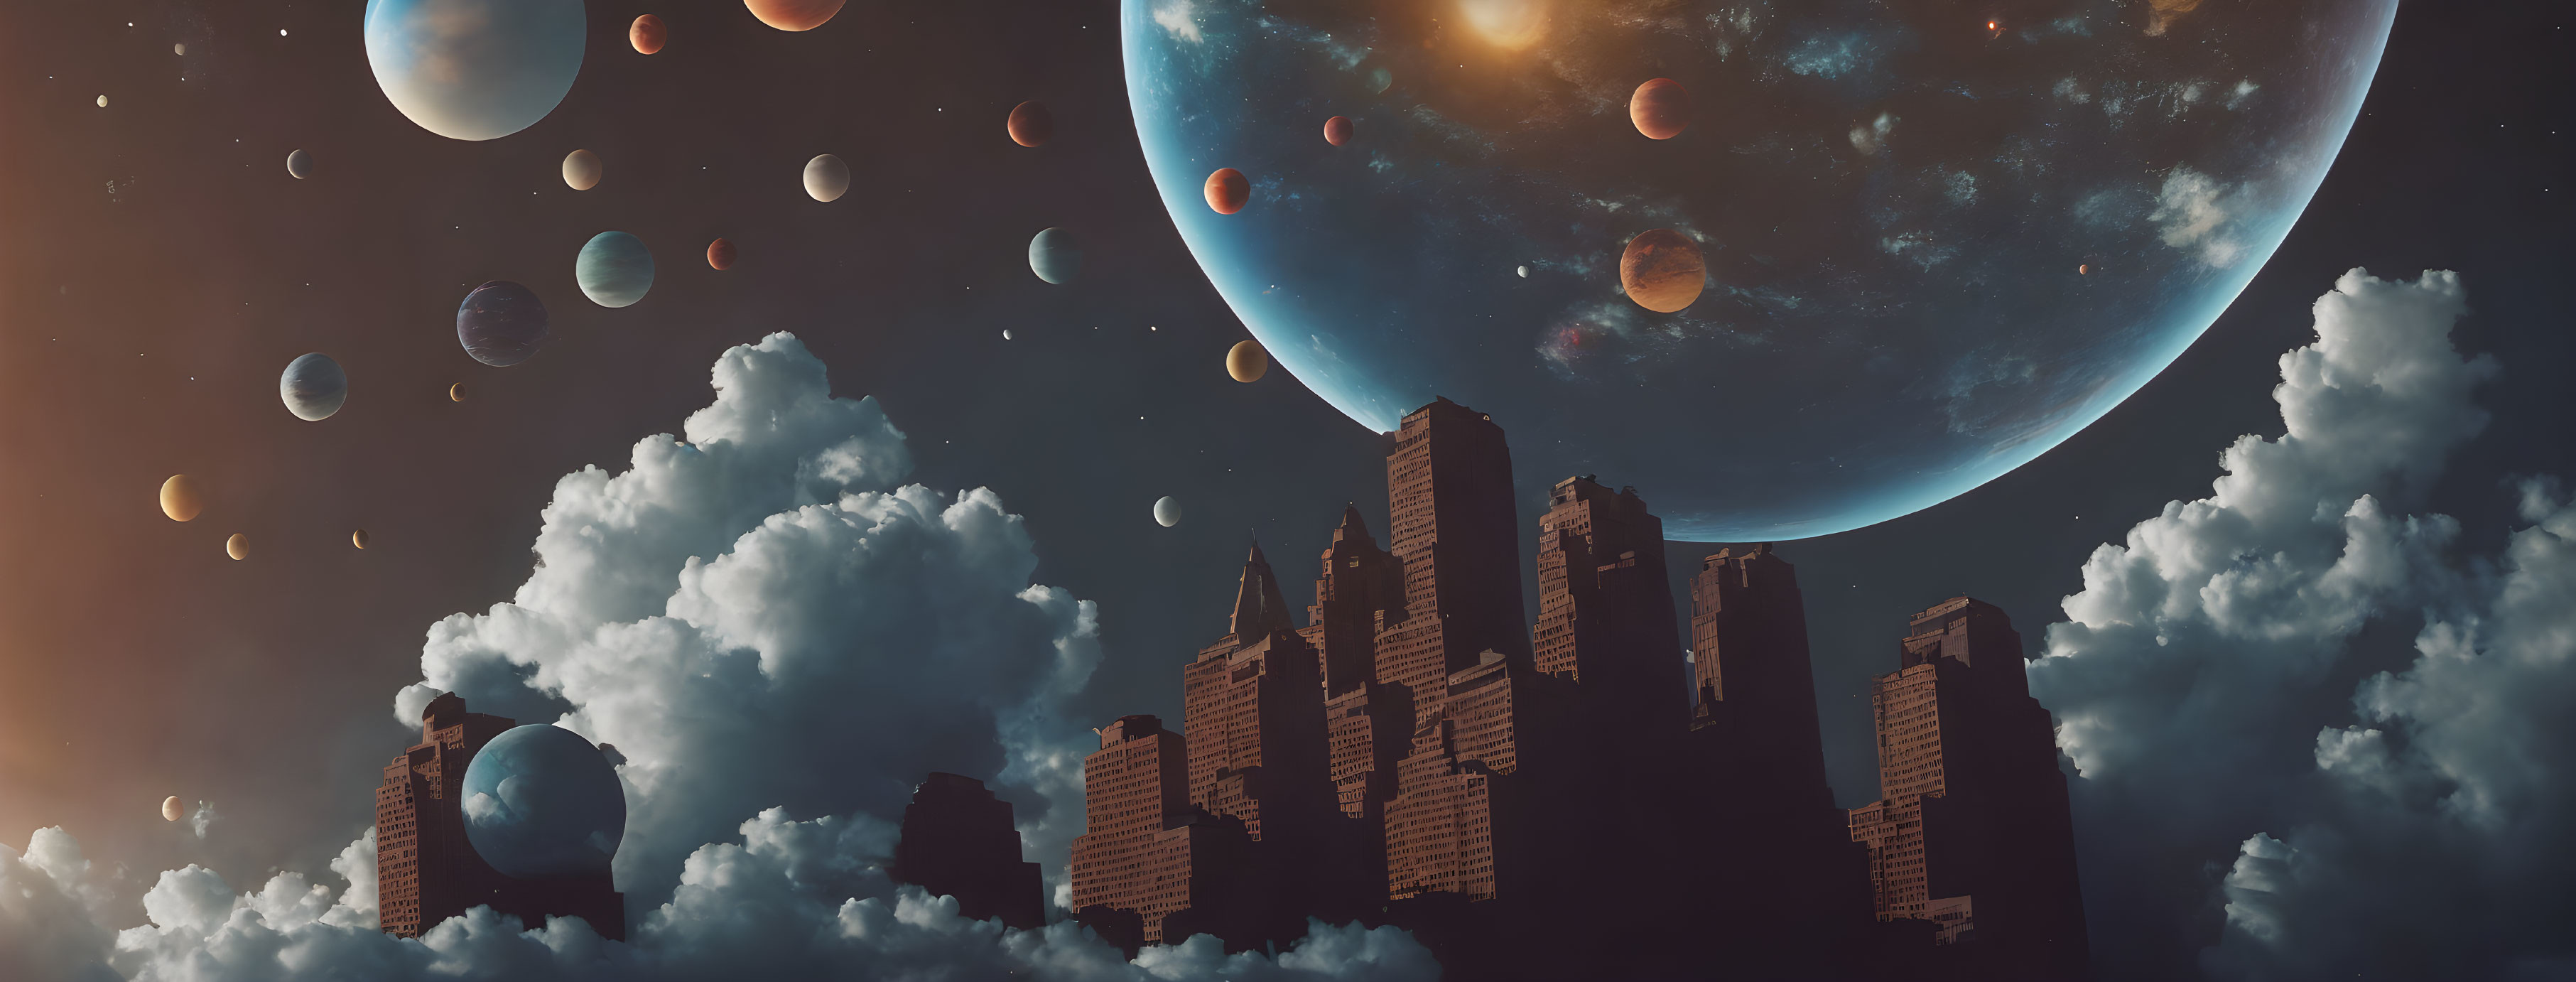 Planets and city